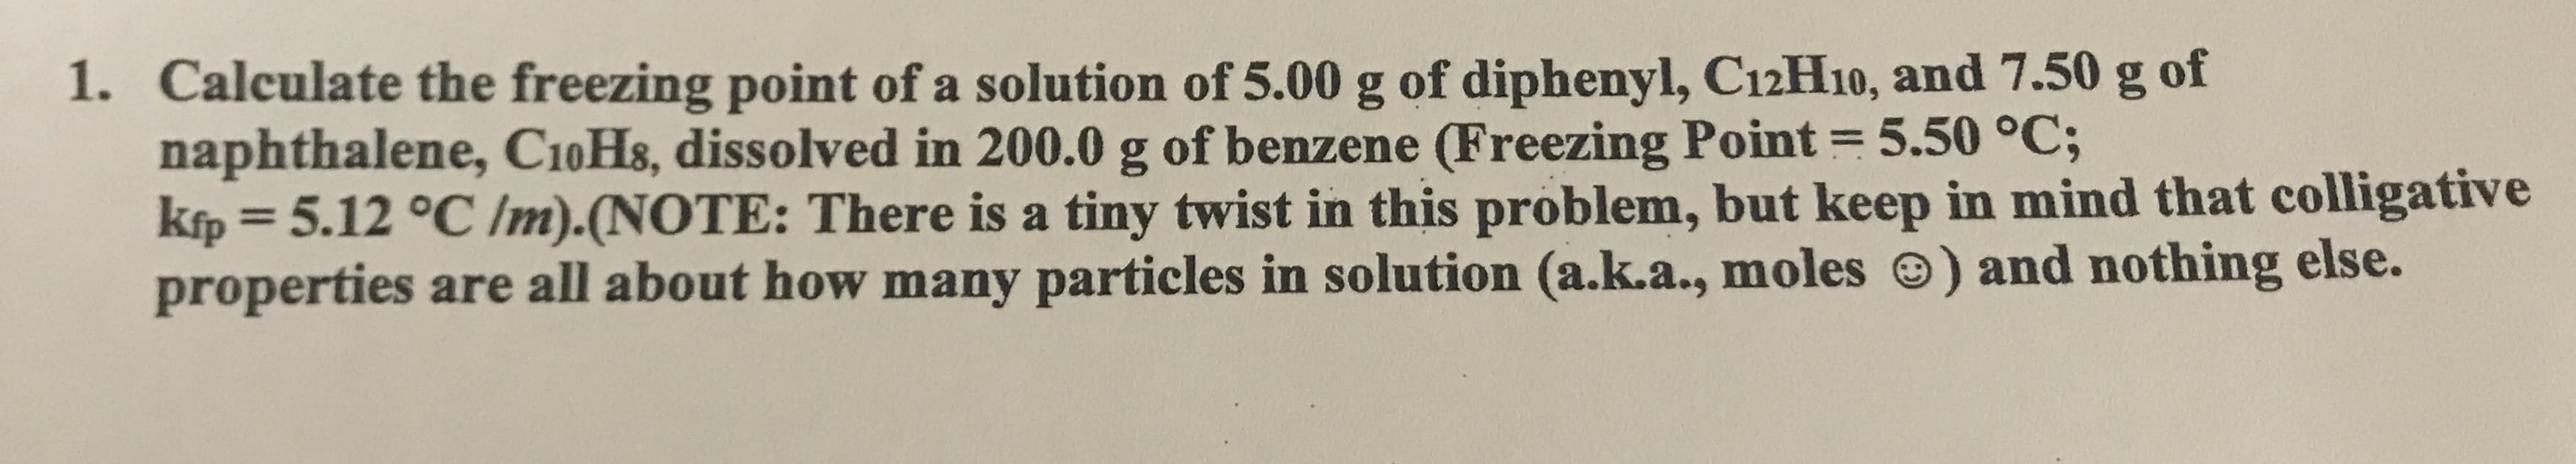 1. Calculate the freezing point of a solution of 5.00 g of diphenyl, C12H10, and 7.50 g of
naphthalene, C10H&, dissolved in 200.0 g of benzene (Freezing Point 5.50 °C;
kfp= 5.12 °C Im).(NOTE: There is a tiny twist in this problem, but keep in mind that colligative
properties are all about how many particles in solution (a.k.a., moles) and nothing else.
